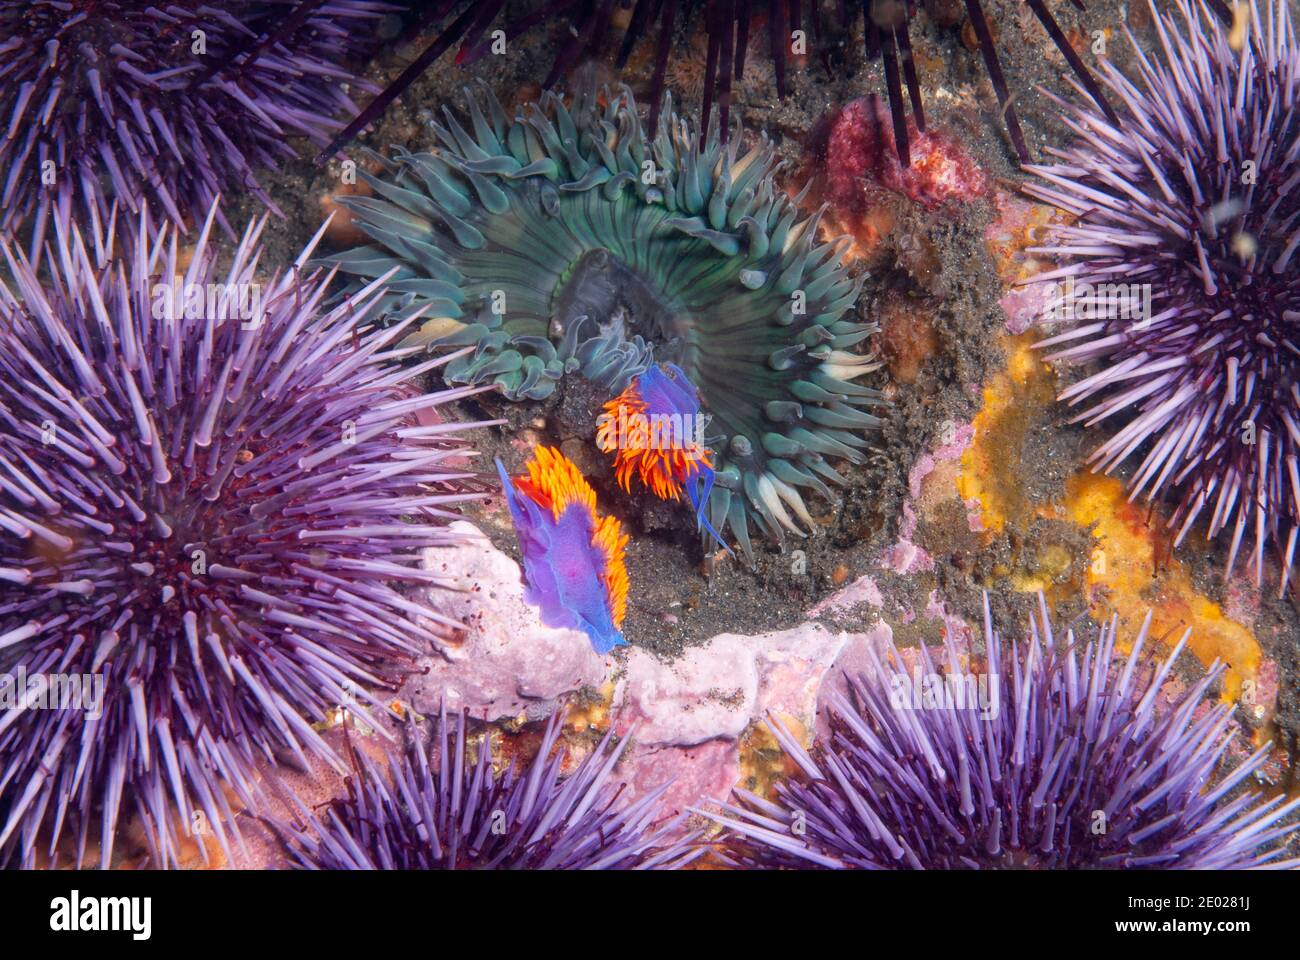 Spanish shawl nudibranch surrounded by sea urchin Stock Photo